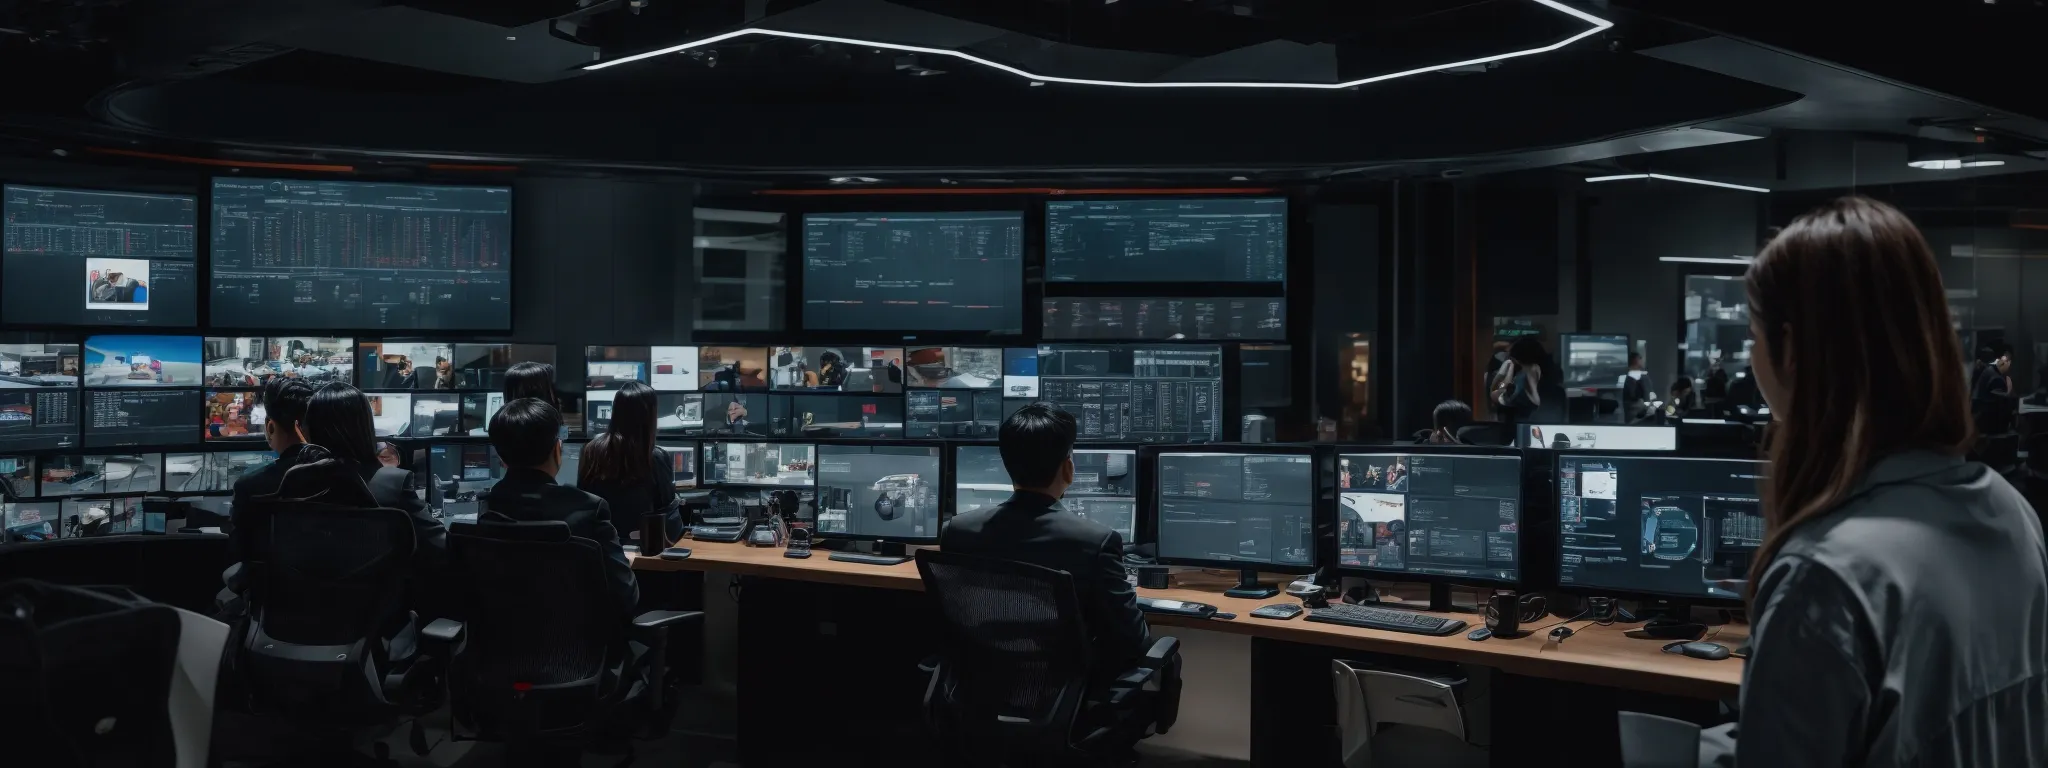 a sleek command center with multiple screens displaying analytics and social media activity for brand monitoring.